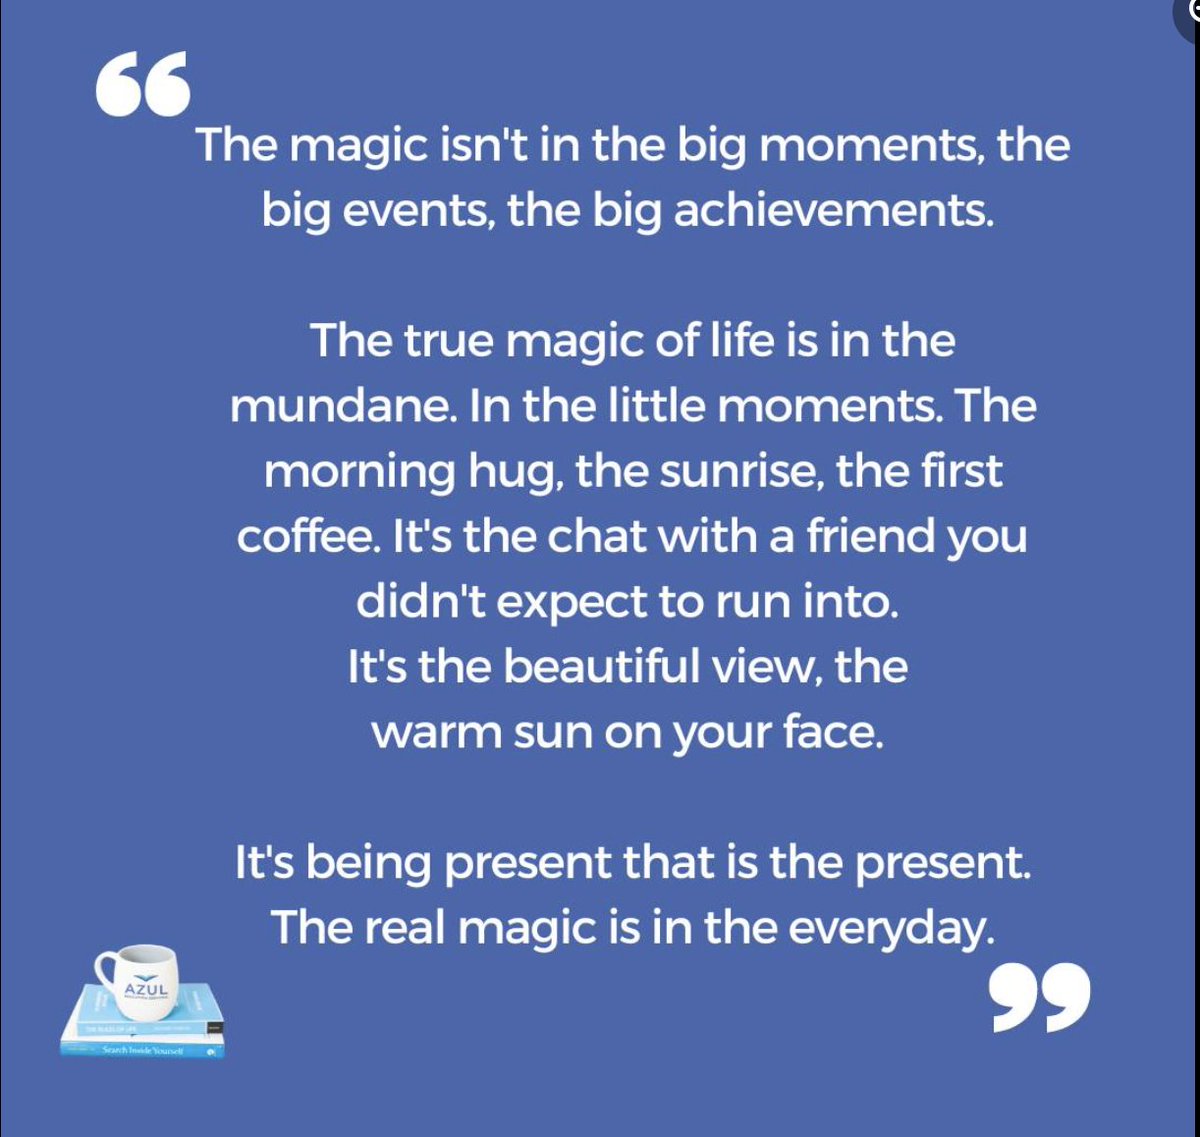 The magic isn't in the big moments, the big events, the big achievements. The real magic is in everyday. #FridayFeeling #beingpresent #everydaymagic